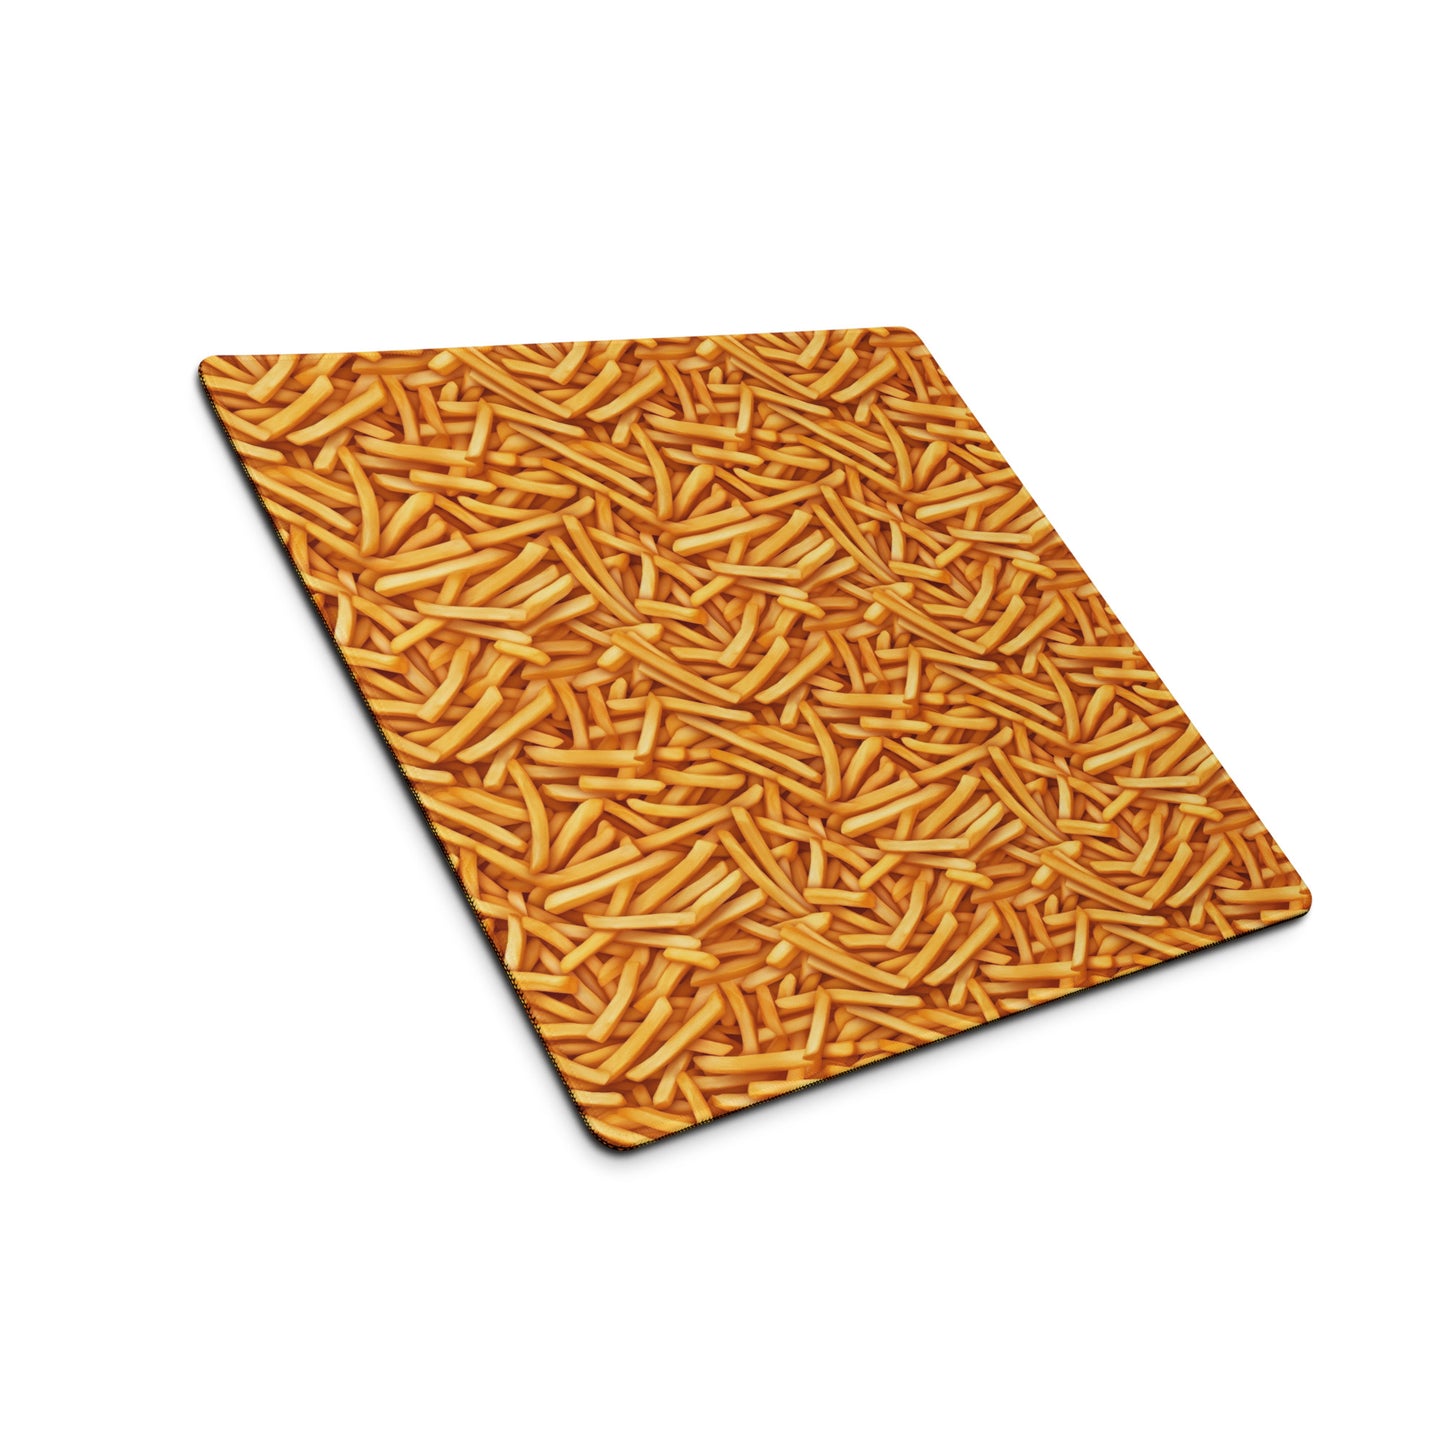 A 18" x 16" desk pad with a bunch of french fries all over it shown at an angle. Yellow in color.